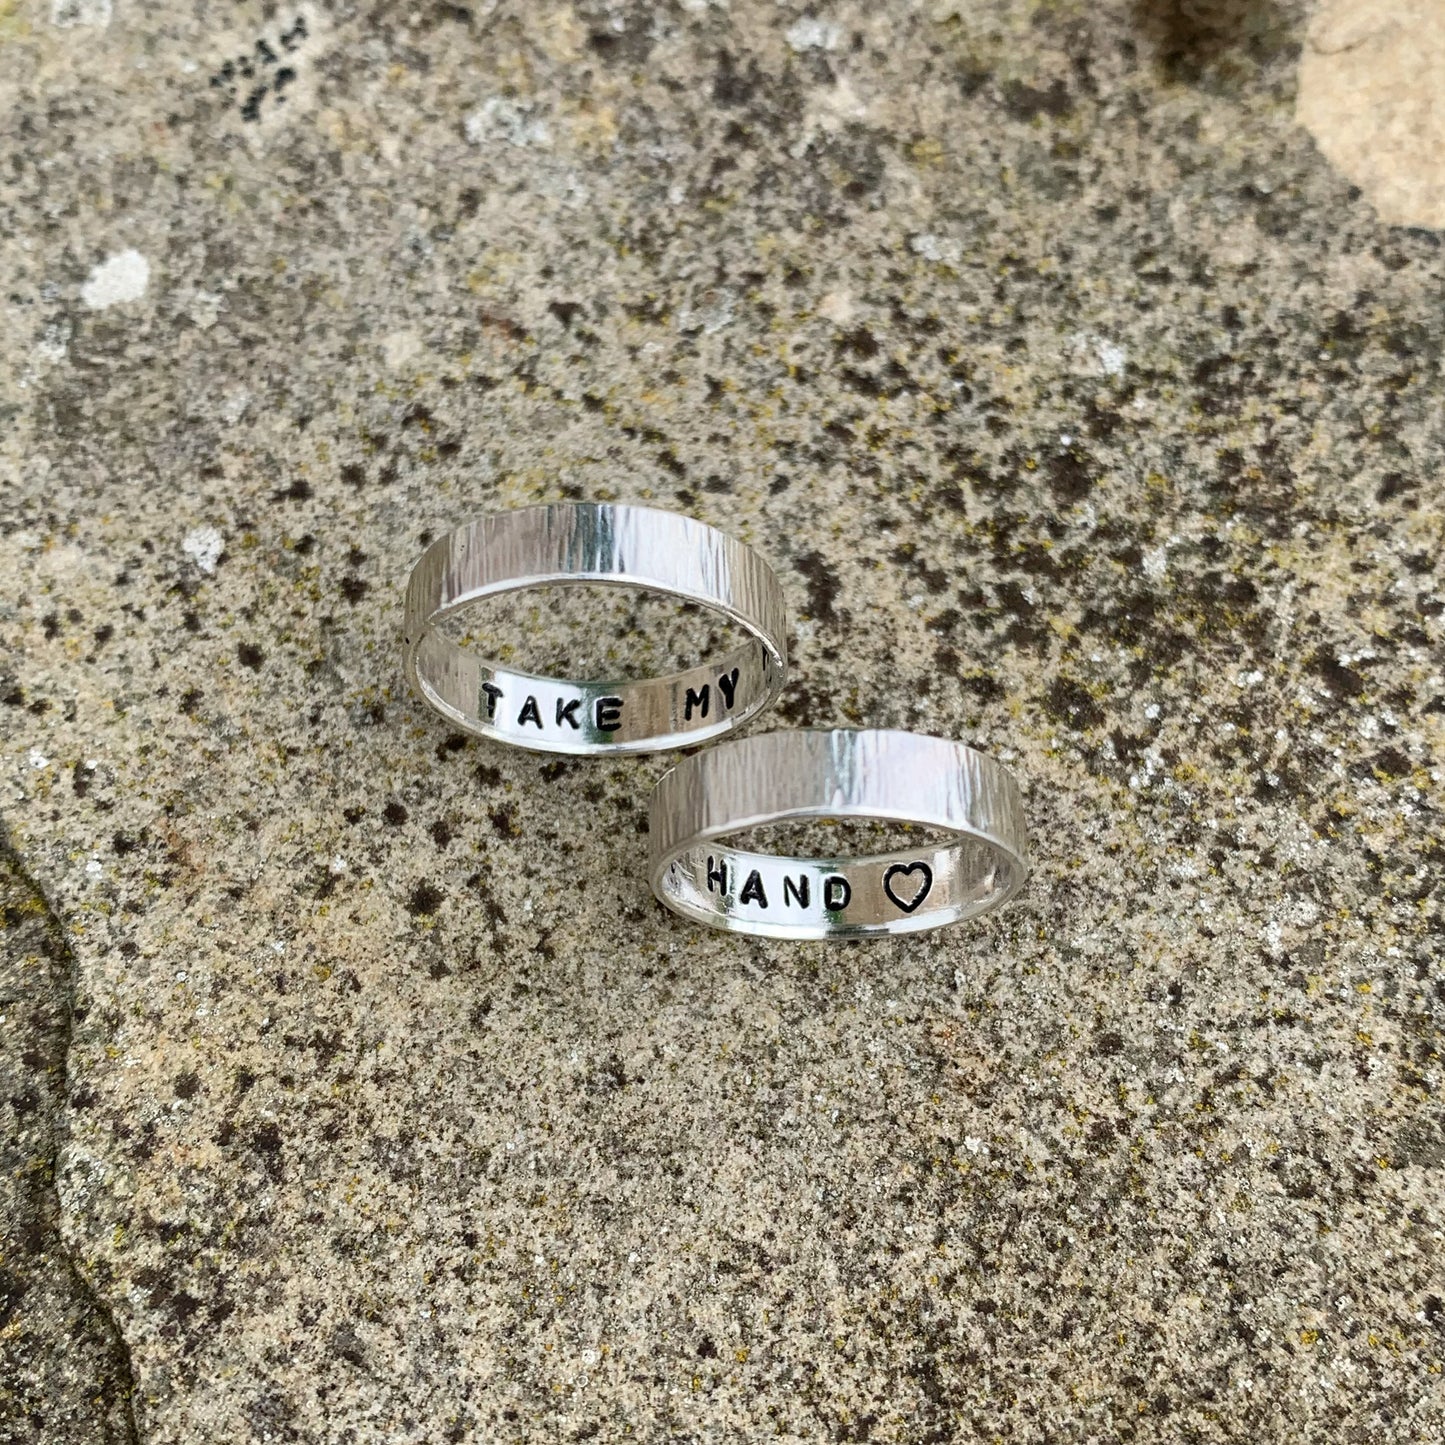 Sterling silver ring with engraving